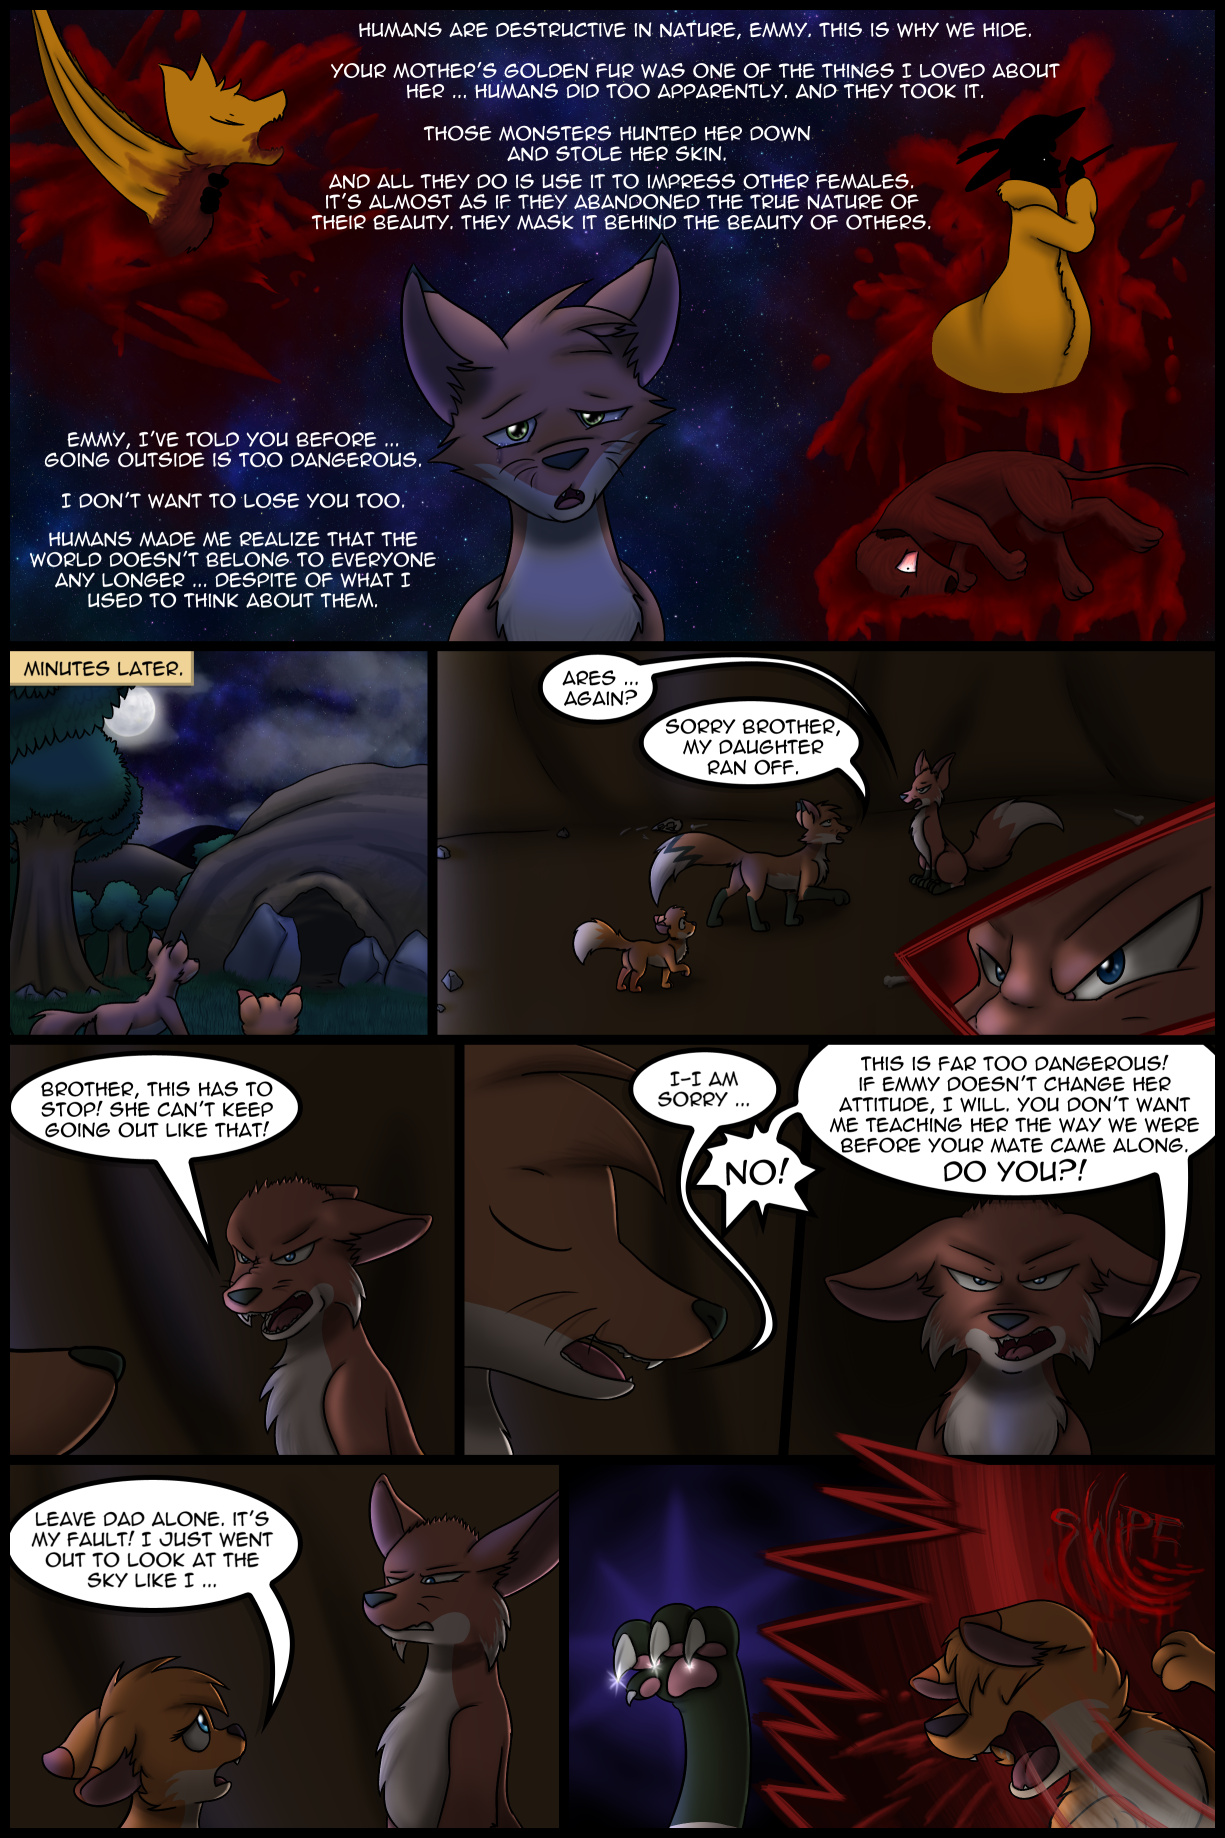 Ch1 Remastered Page 5-6 – The World is Cruel – Discipline